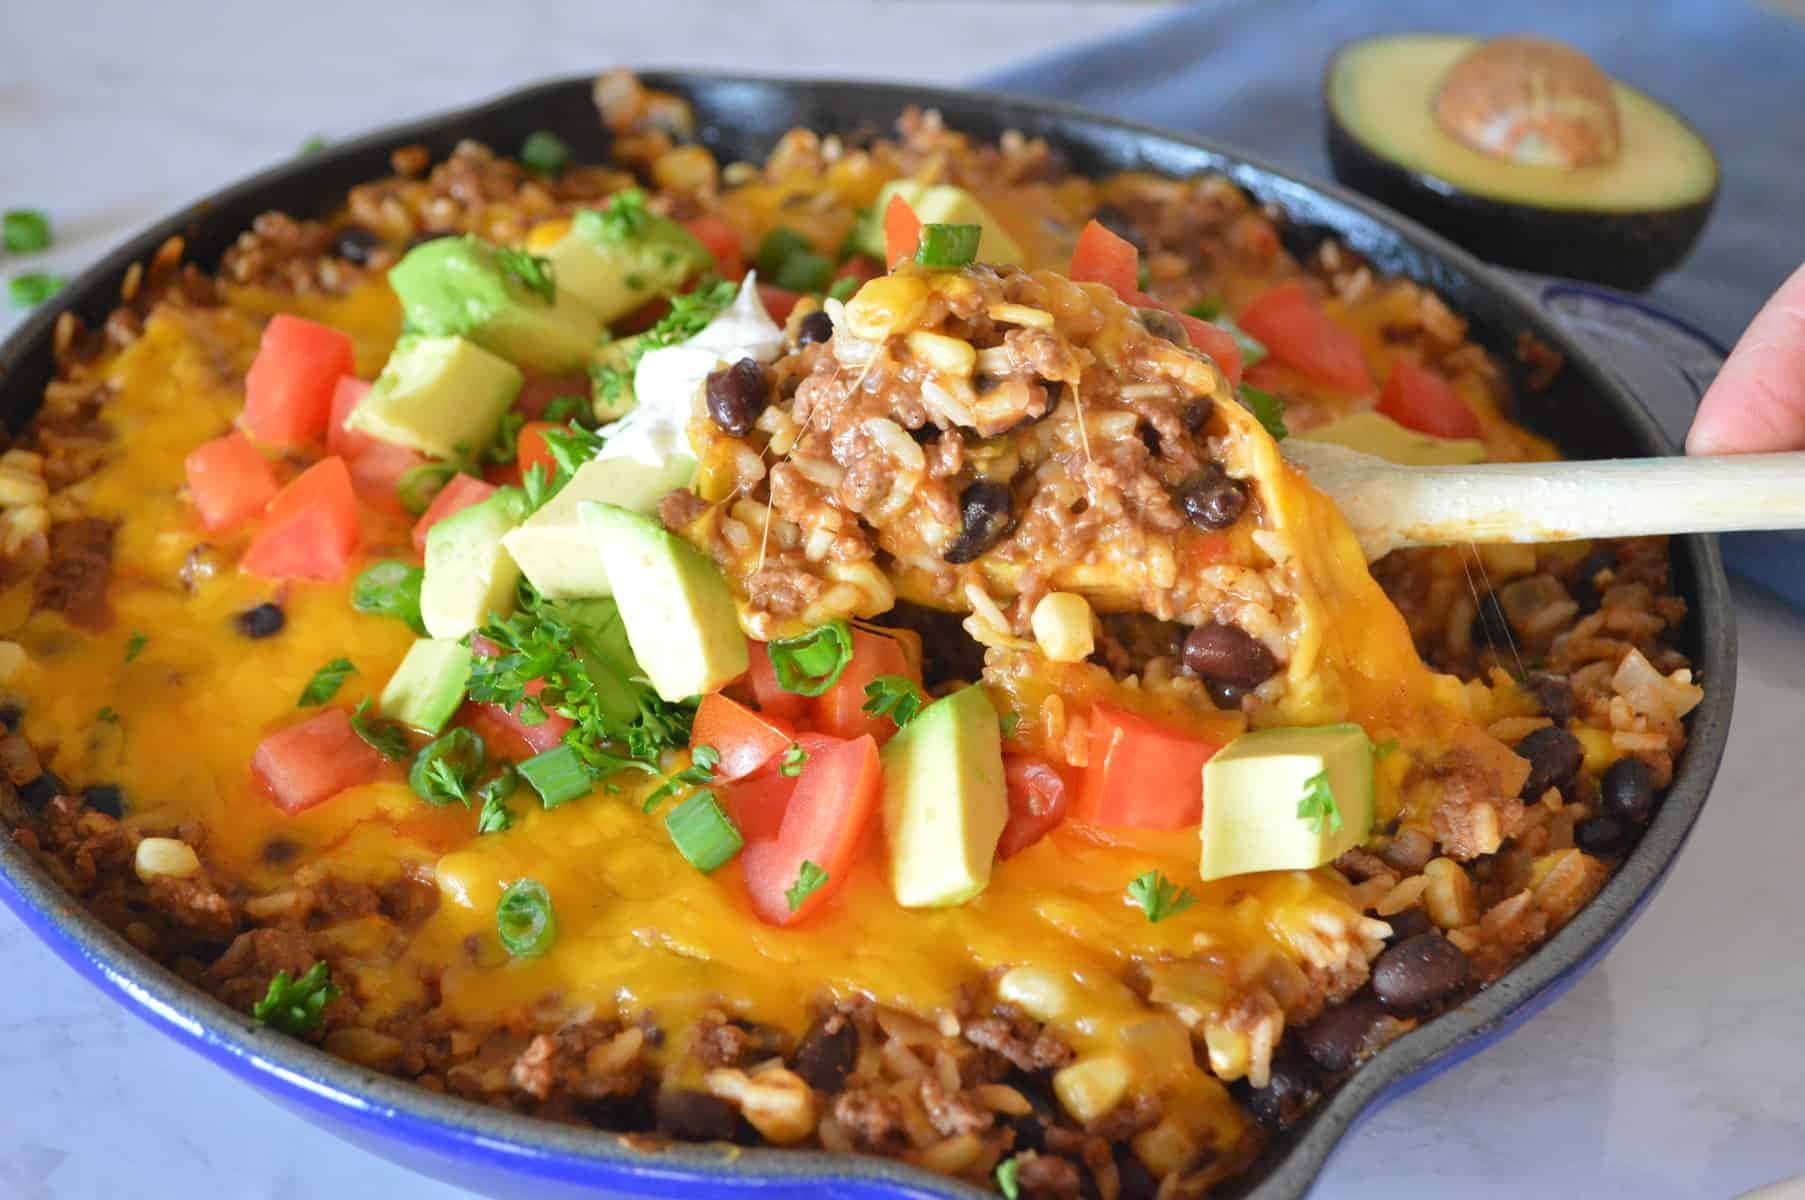 Skillet full of rice, ground beef, salsa, black beans, corn kernels and shredded cheese with chopped tomatoes, avocados and parsley